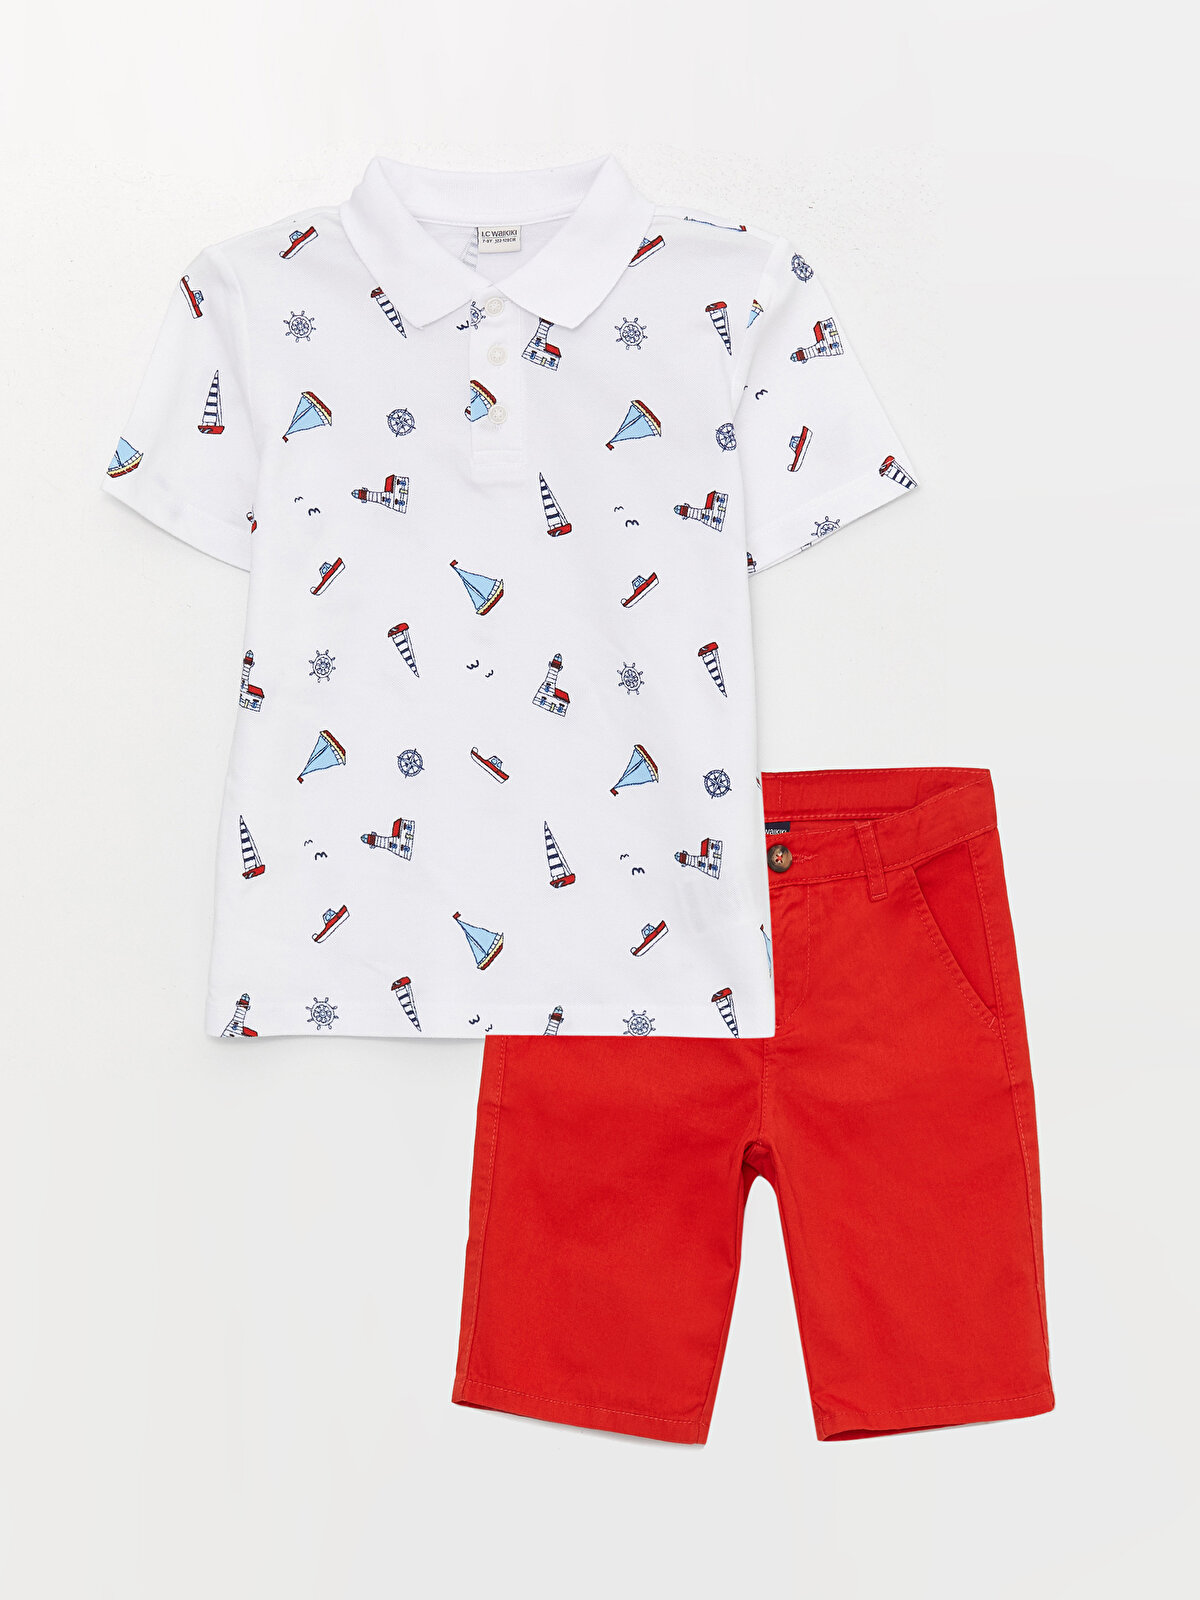 Red Bermuda Shorts with White Polo Shirt